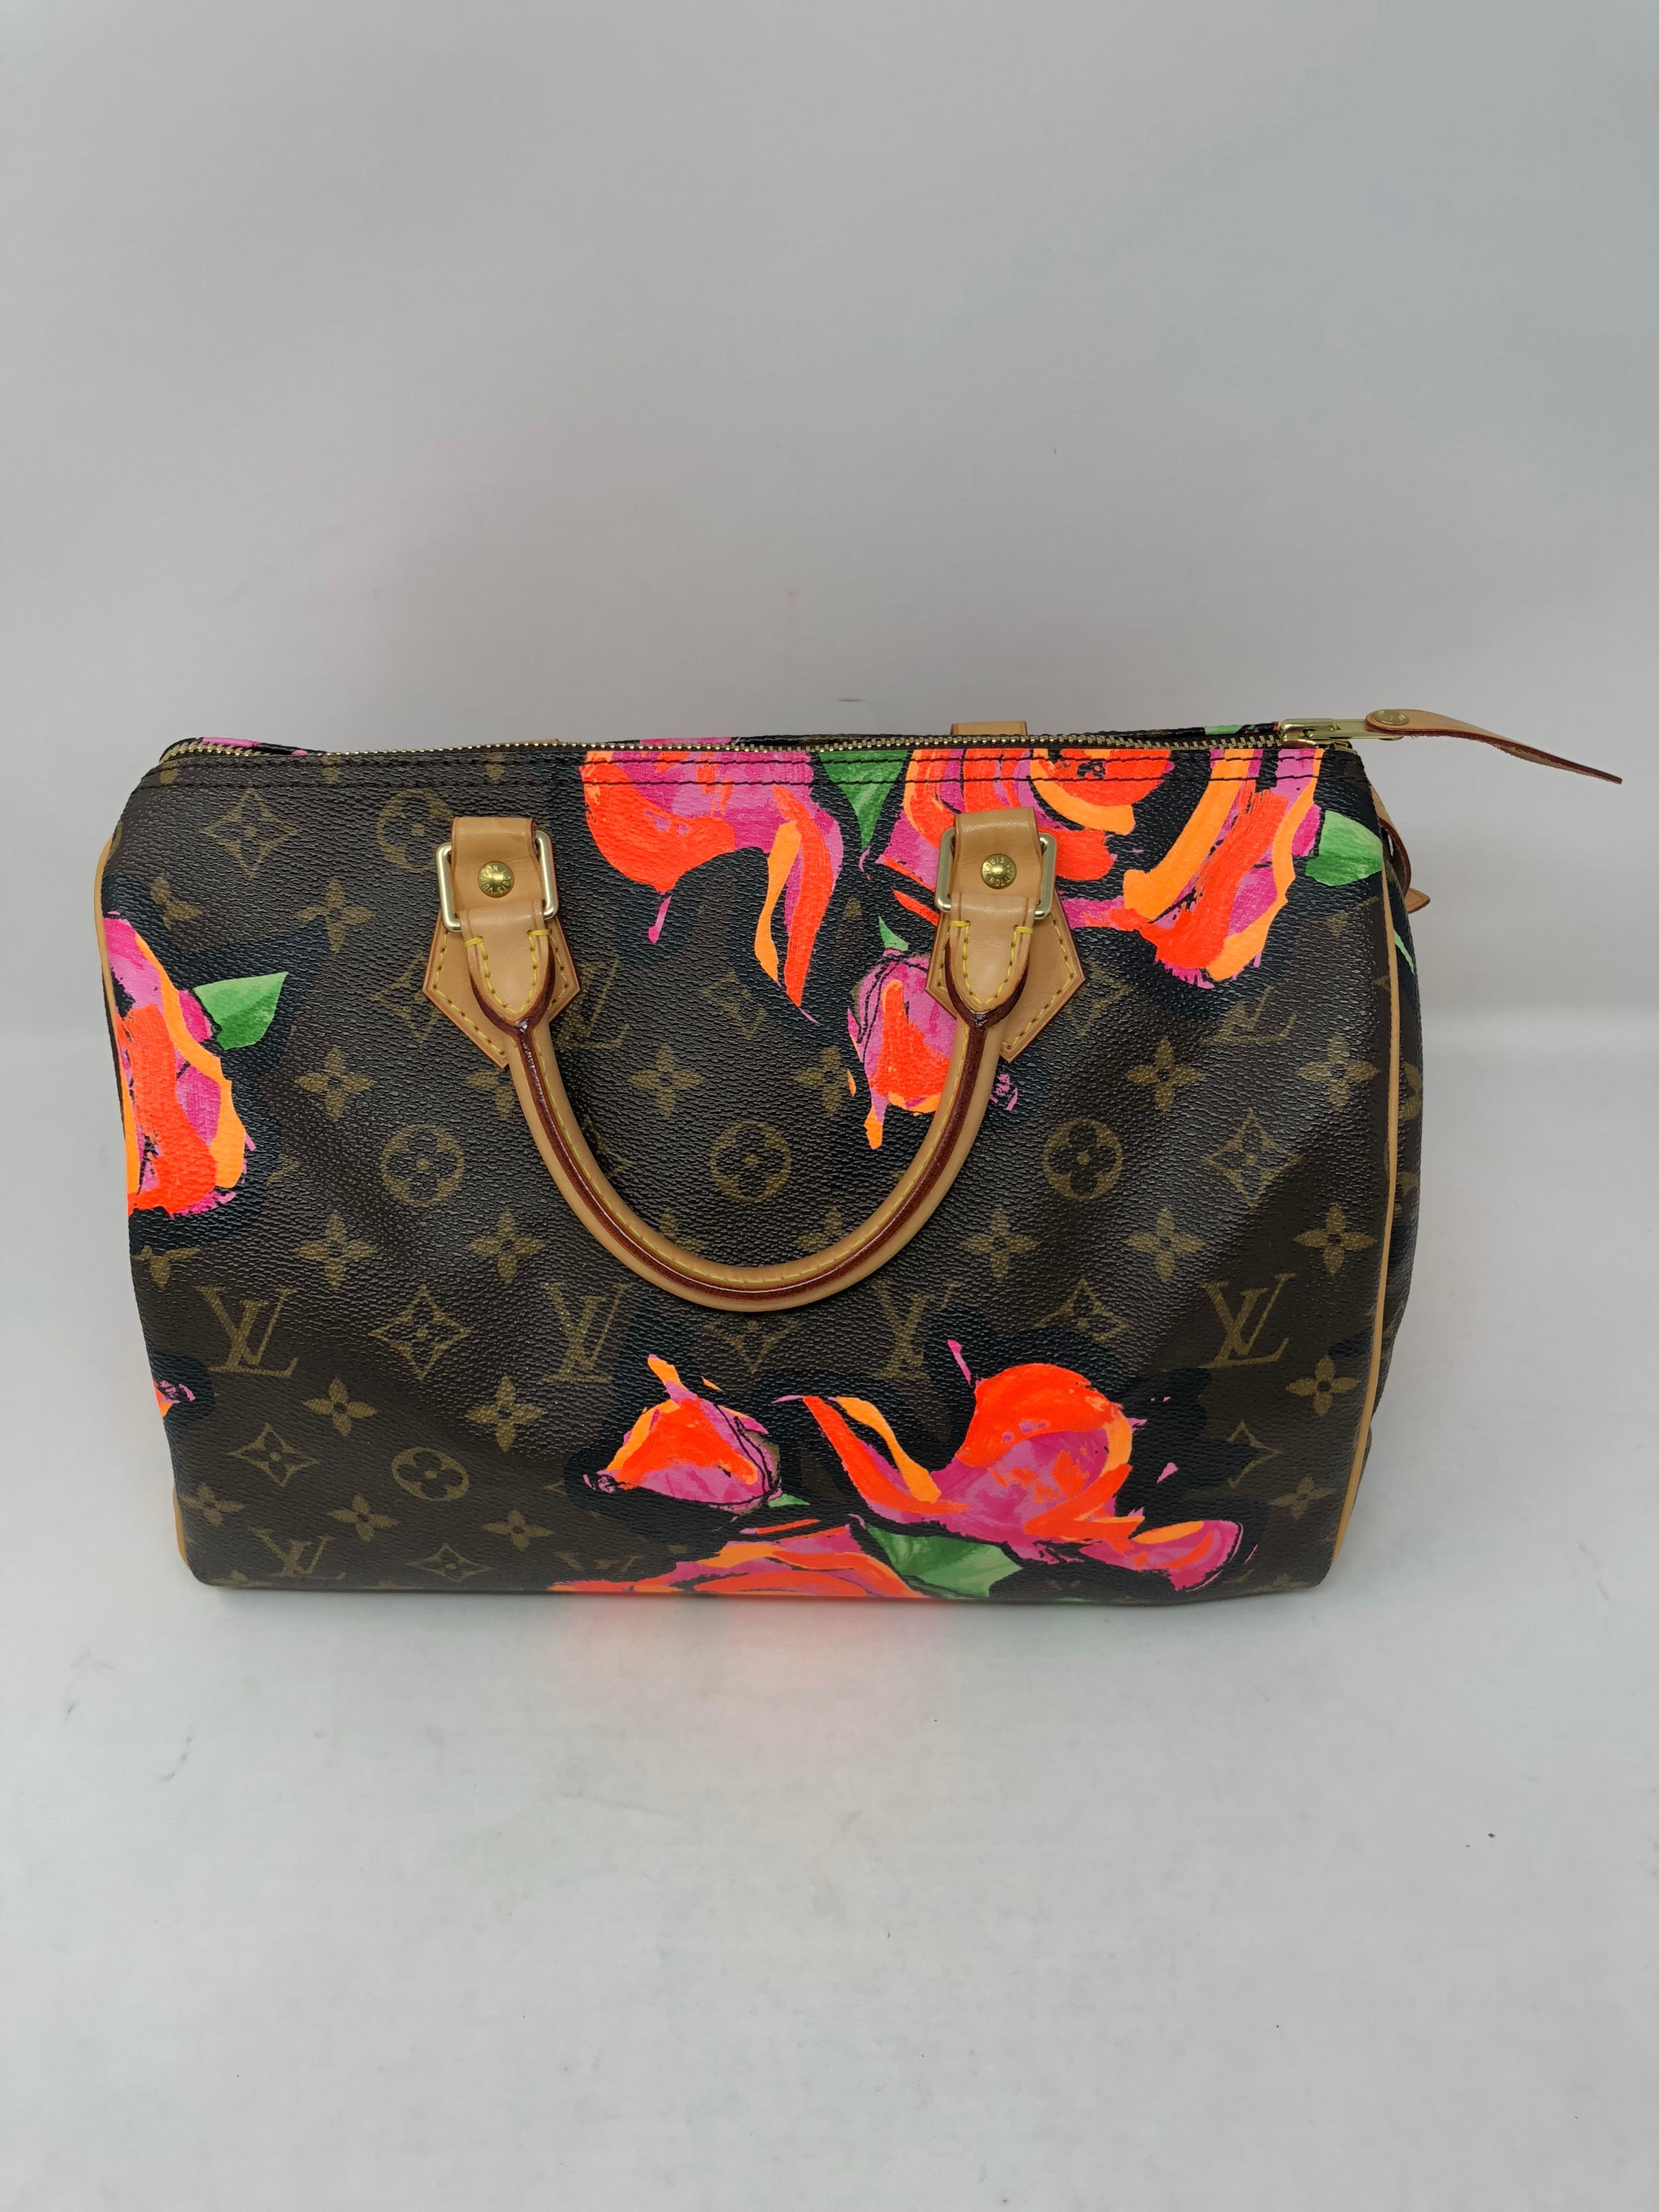 Louis Vuitton Speedy 30 from Stephen Sprouse Roses collection. Rare speedy by iconic designer Stephen Sprouse. Hard to find speedy and in excellent condition. Interior clean too. Guaranteed authentic. 